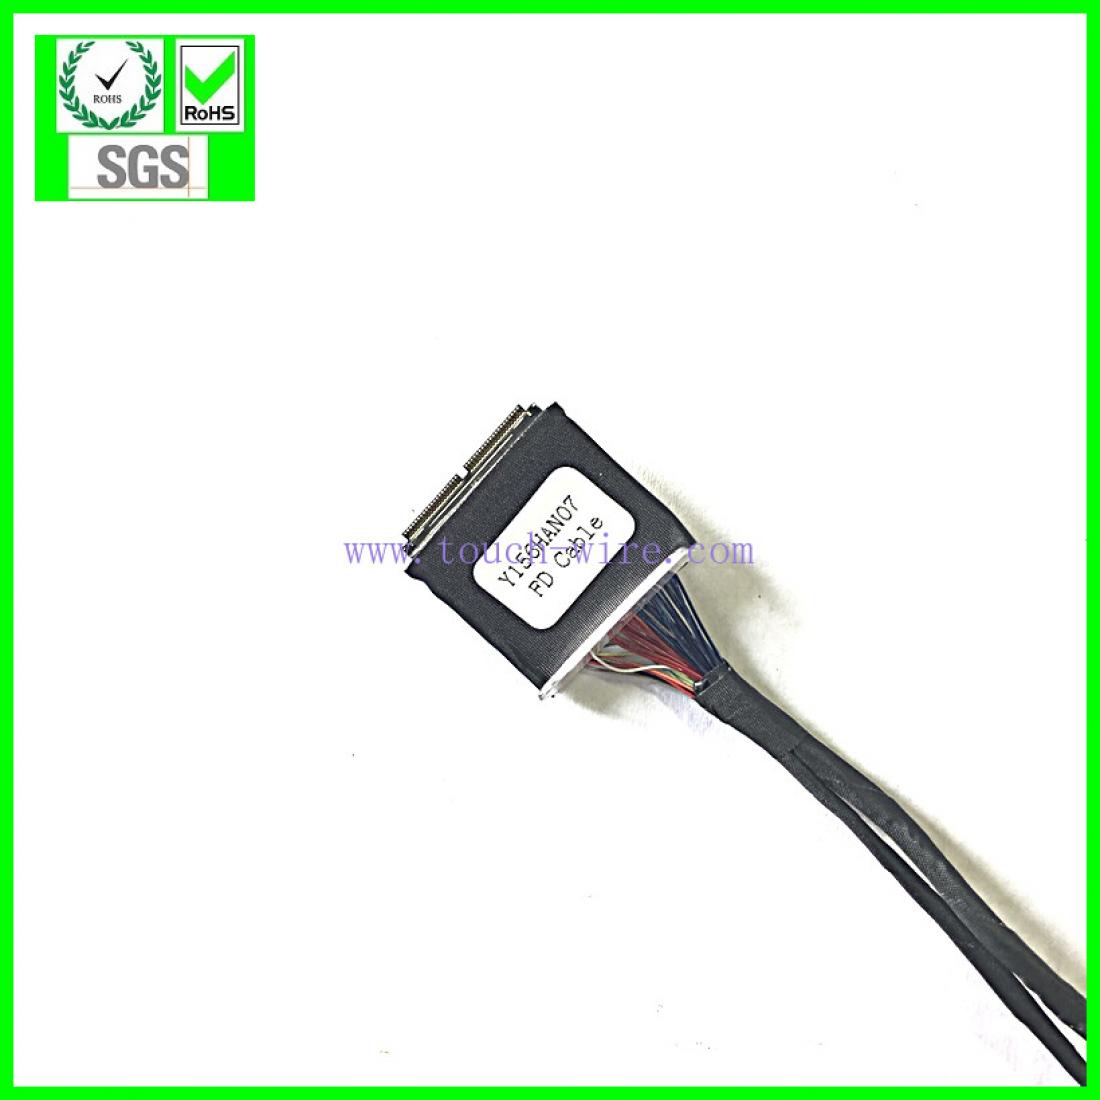 LVDS CABLE: IPEX 20728-030T, IPEX 20728-040T ,SGC CABLE,eDP CABLE